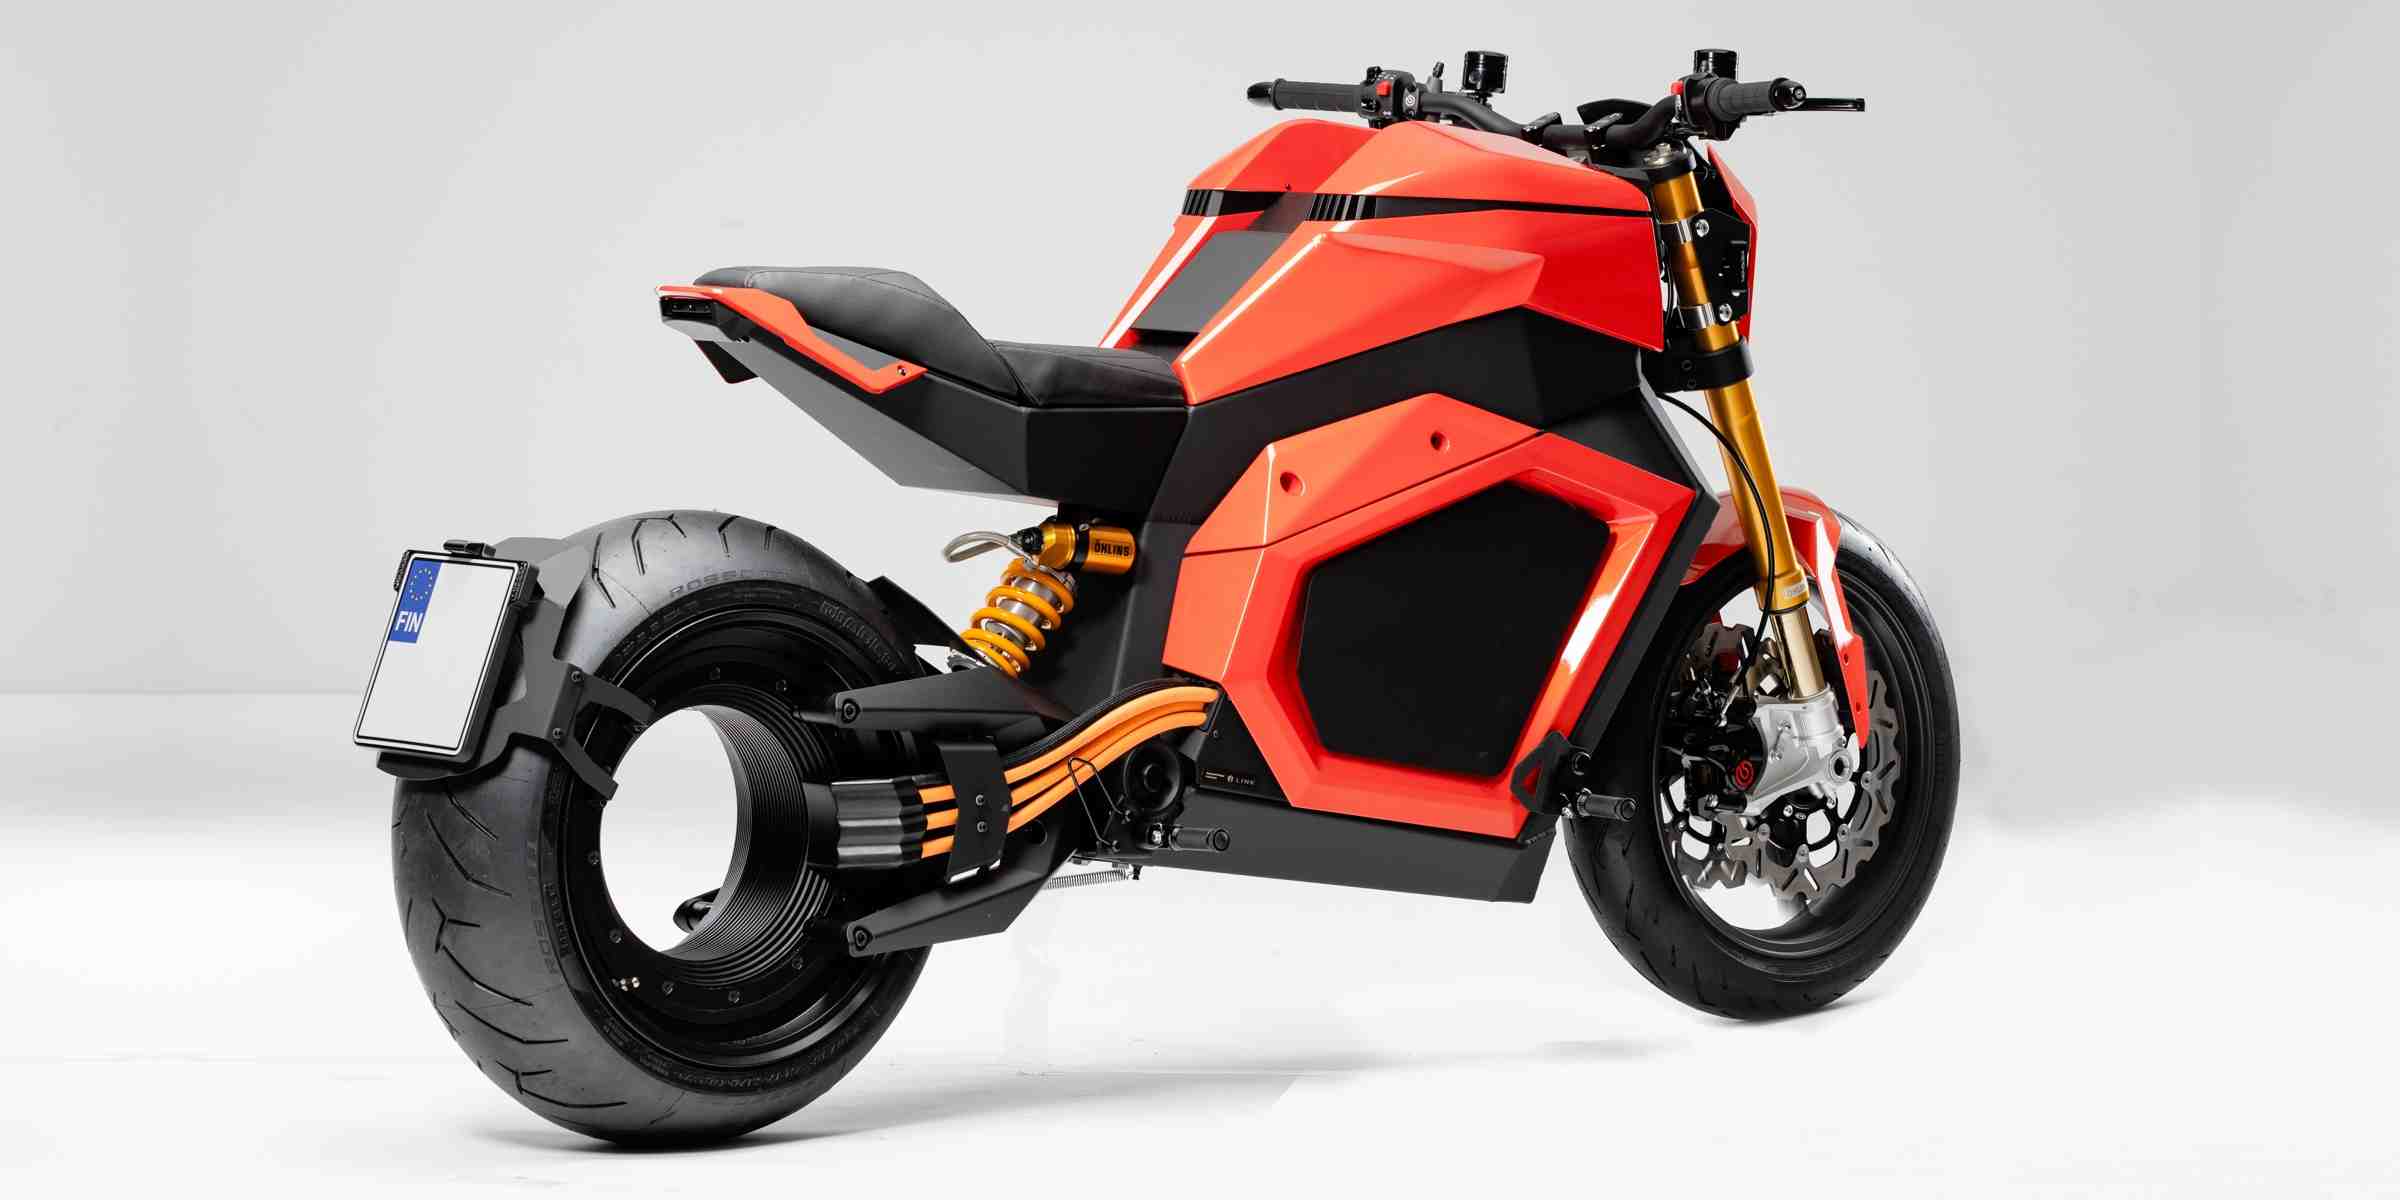 Will motorcycles be electric?